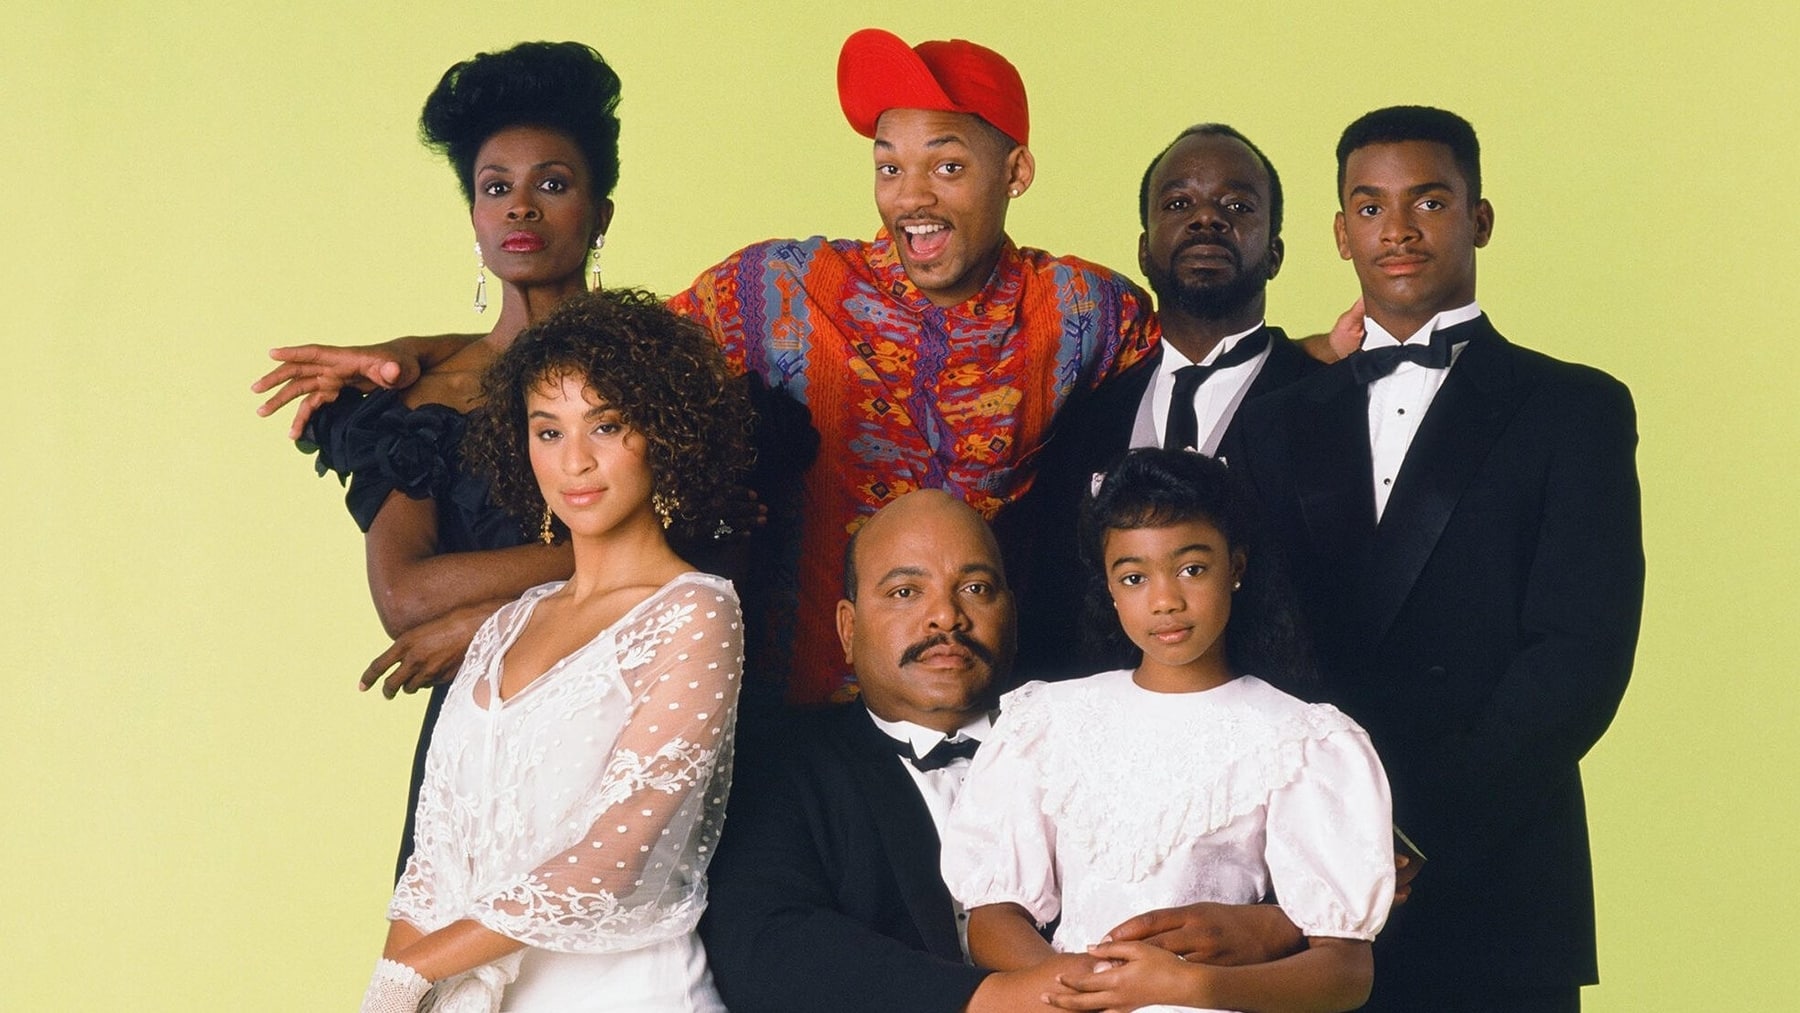 The cast of The Fresh Prince of Bel-Air